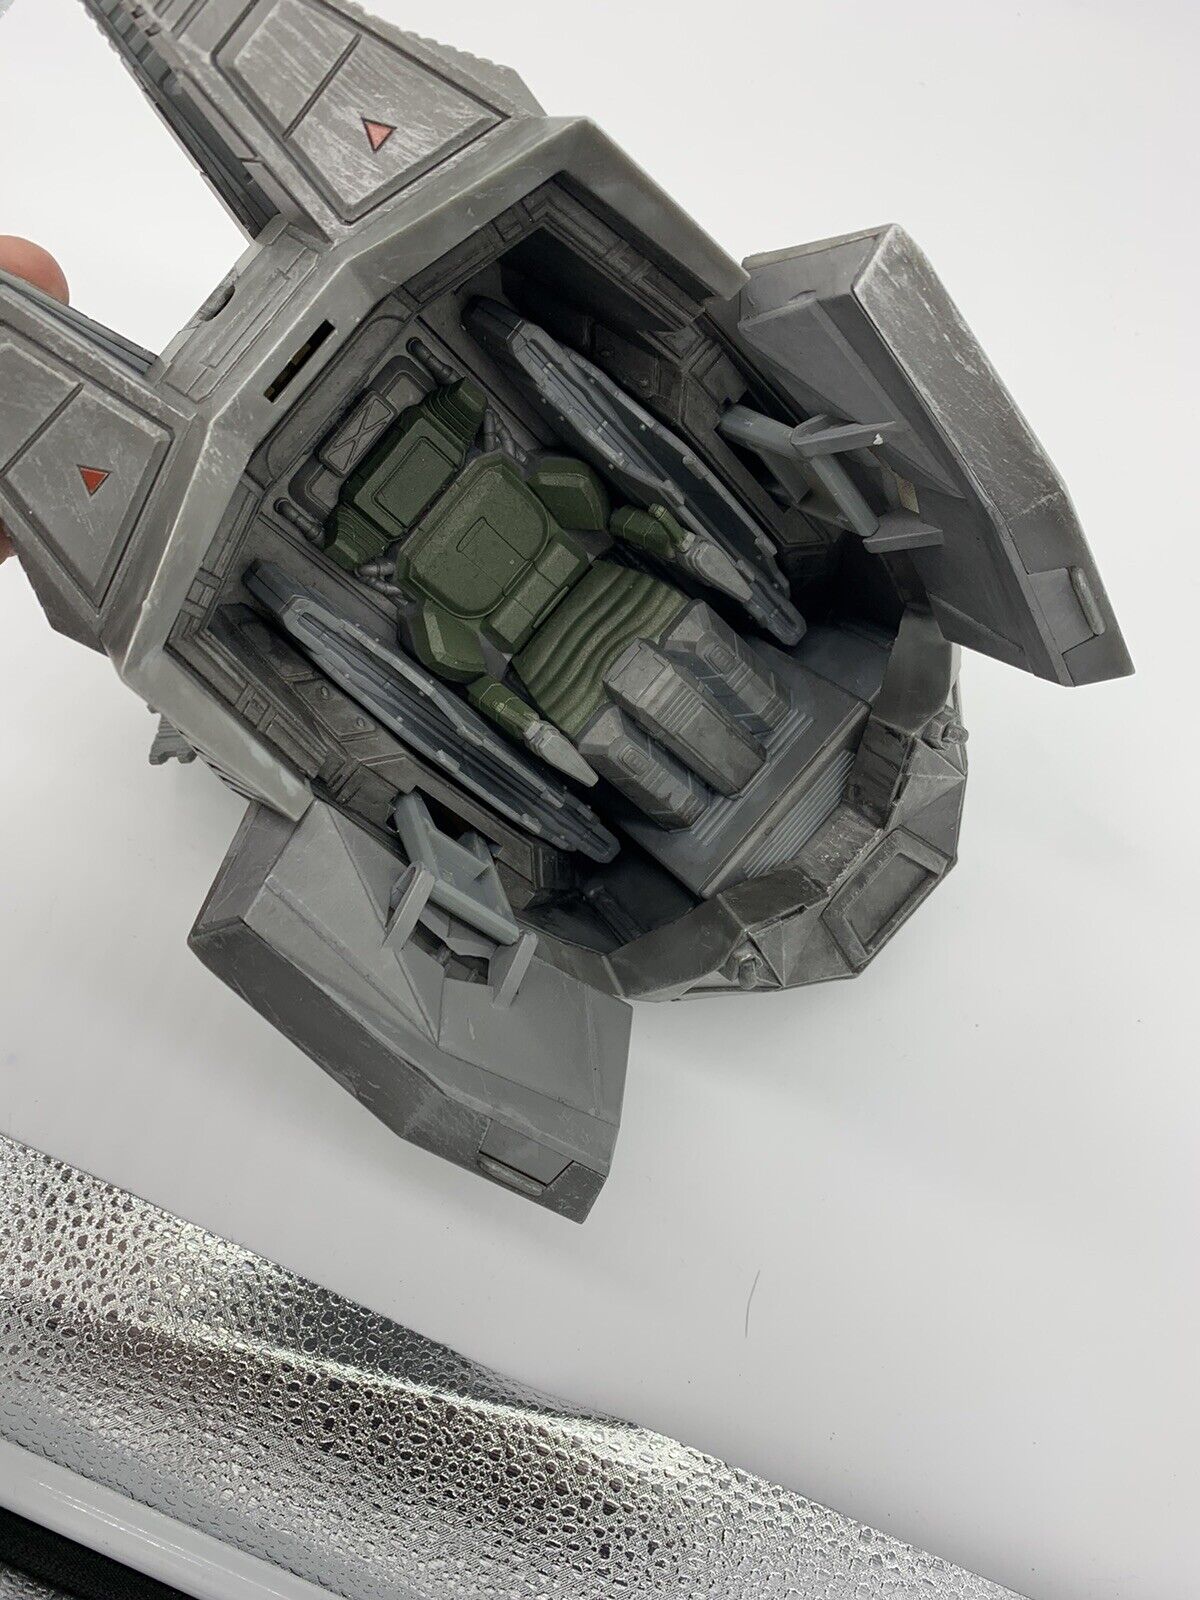 MCFARLANE TOYS HALO 3 ODST DROP POD - For Parts